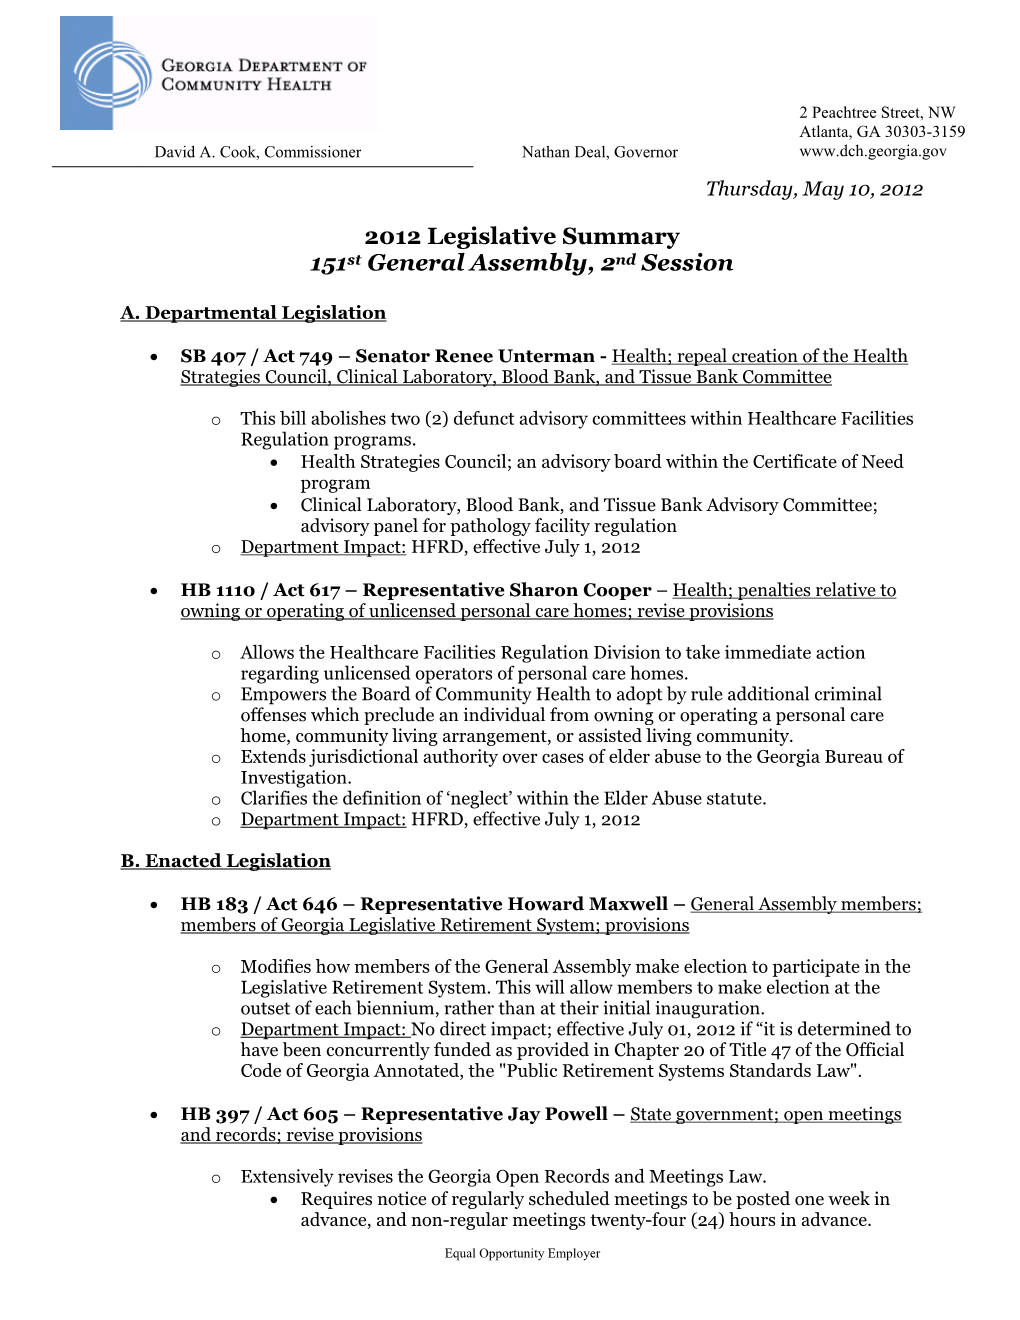 2012 Legislative Summary 151St General Assembly, 2Nd Session